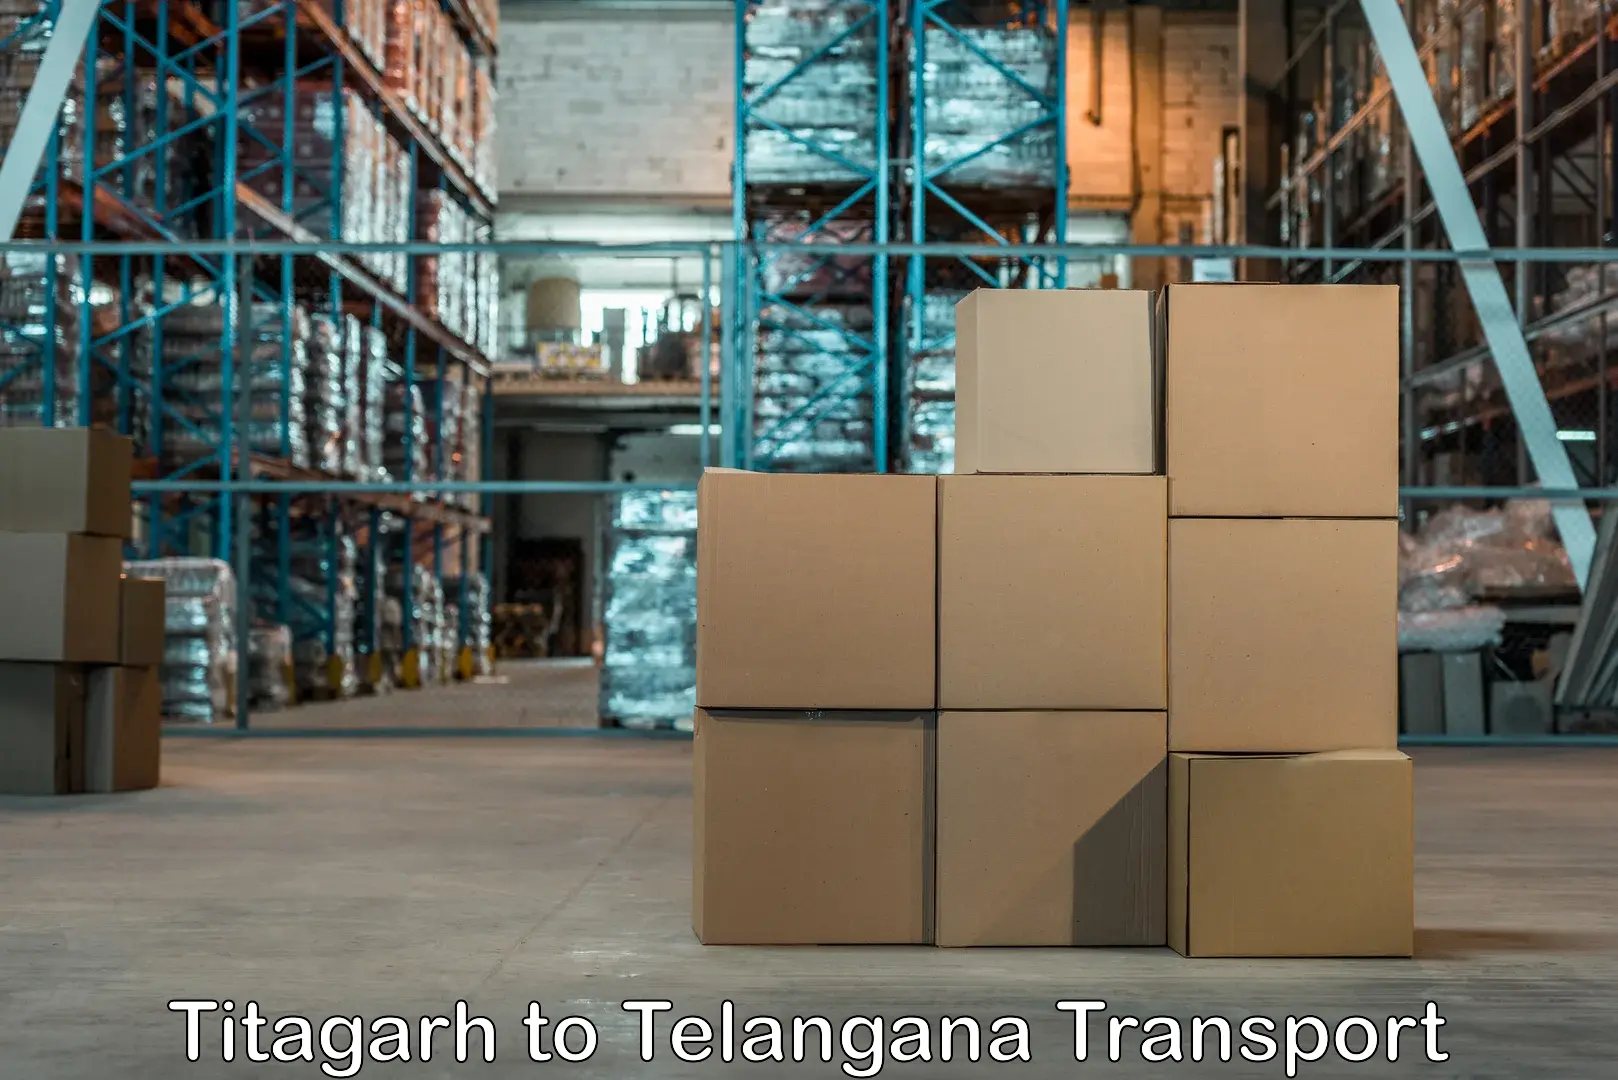 Express transport services in Titagarh to Gangadhara